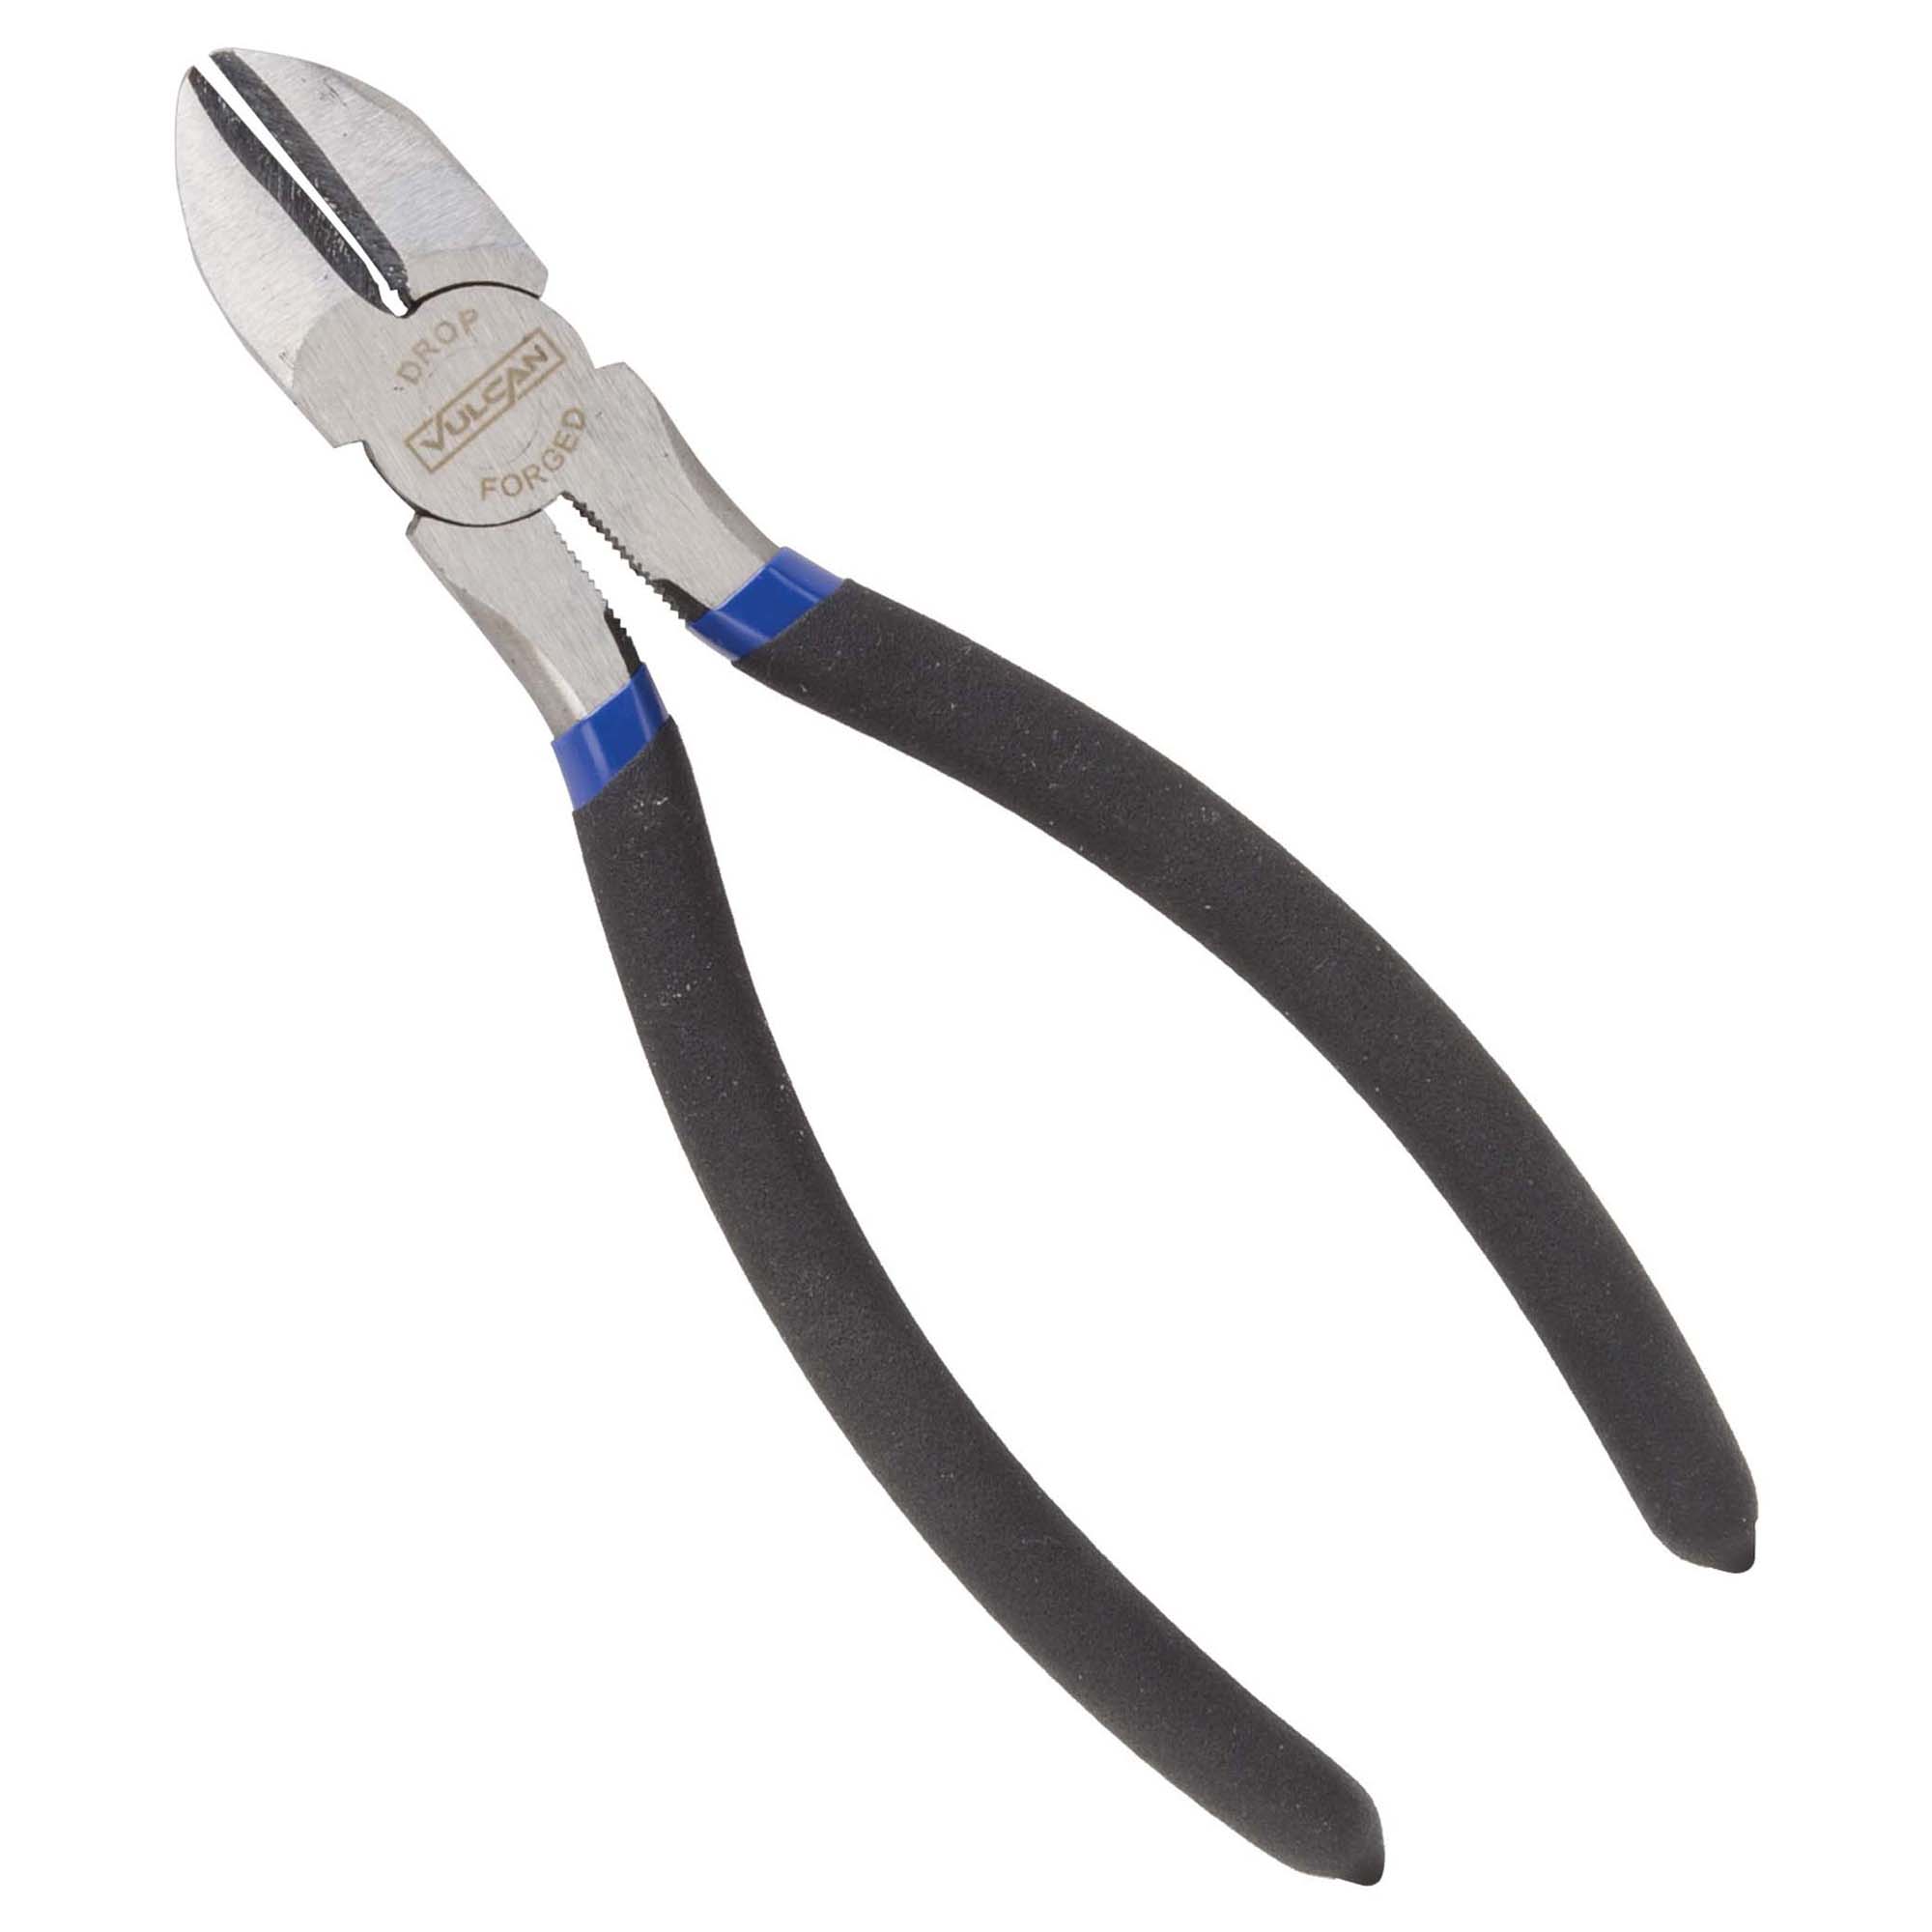 JL-NP015 Diagonal Cutting Plier, 7 in OAL, 1.2 mm Cutting Capacity, 1 in Jaw Opening, Black/Blue Handle